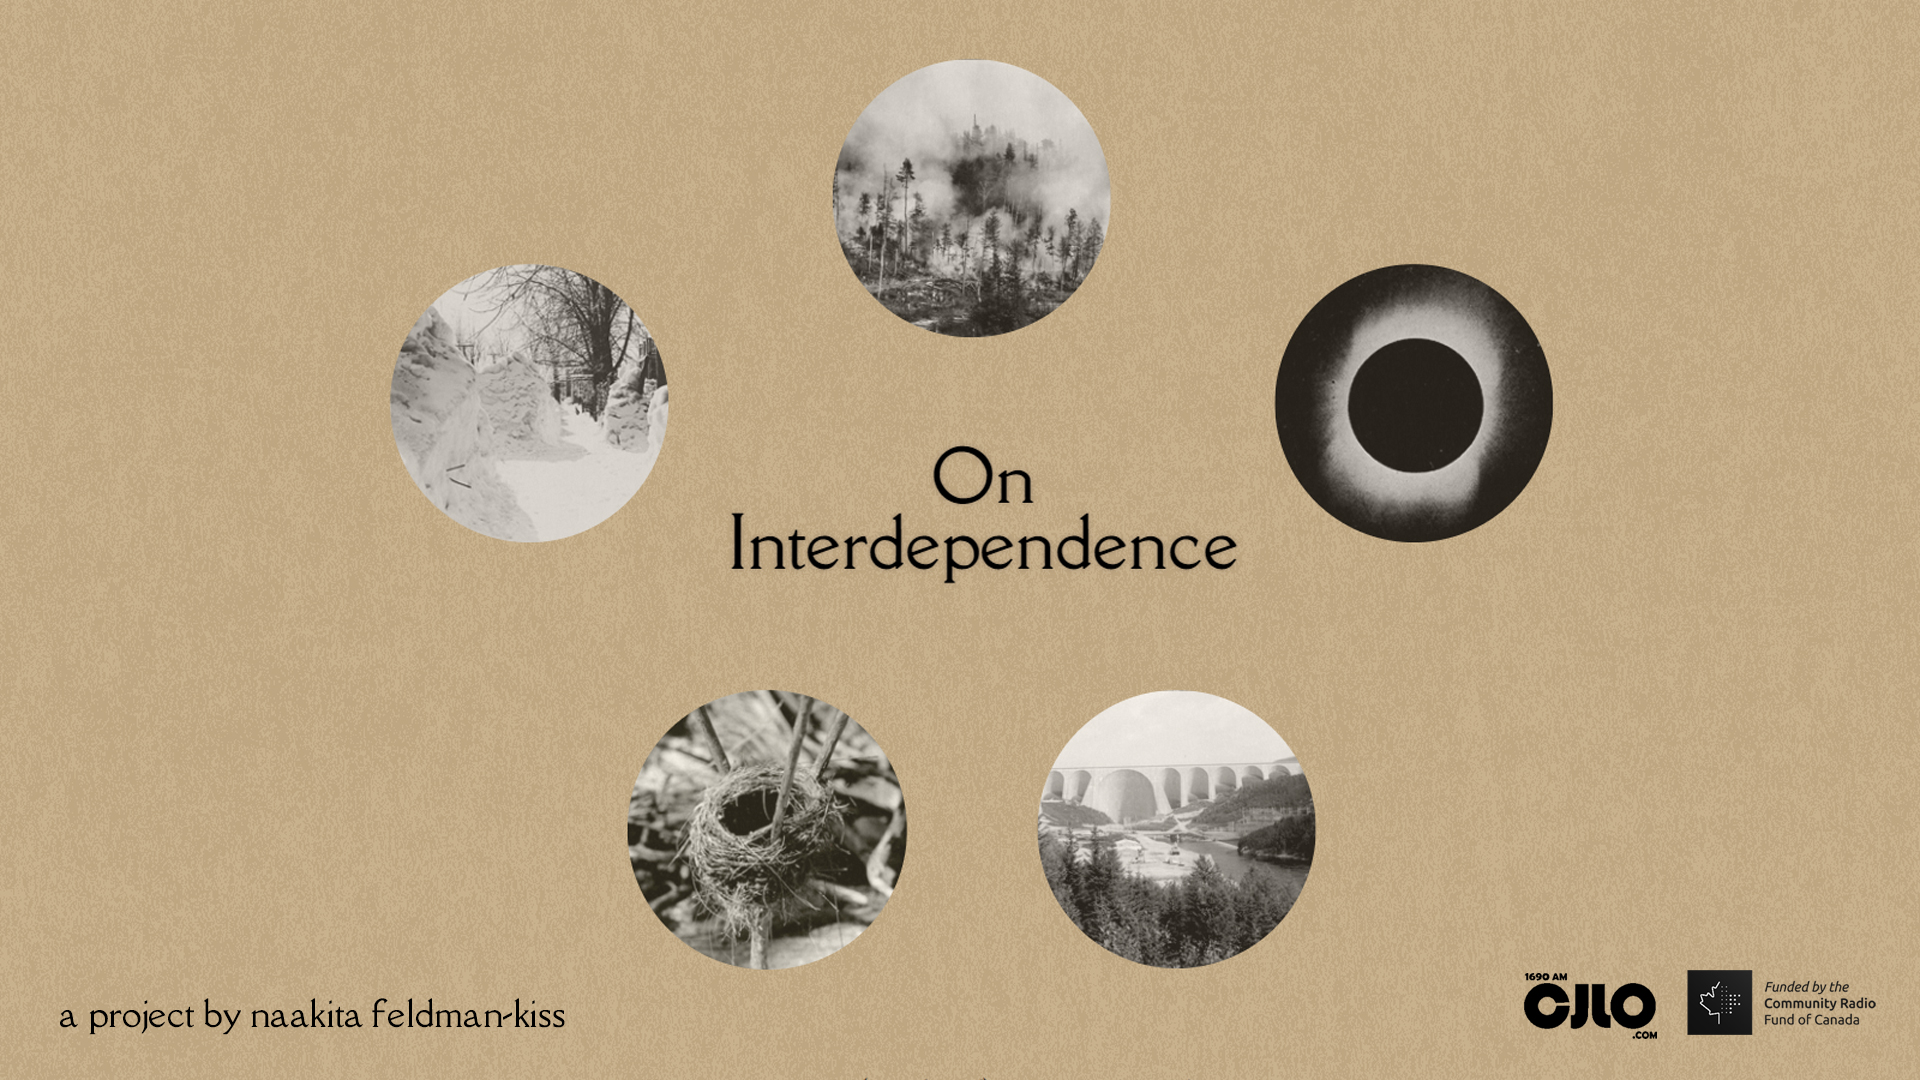 CJLO 1690AM Presents: On Interdependence